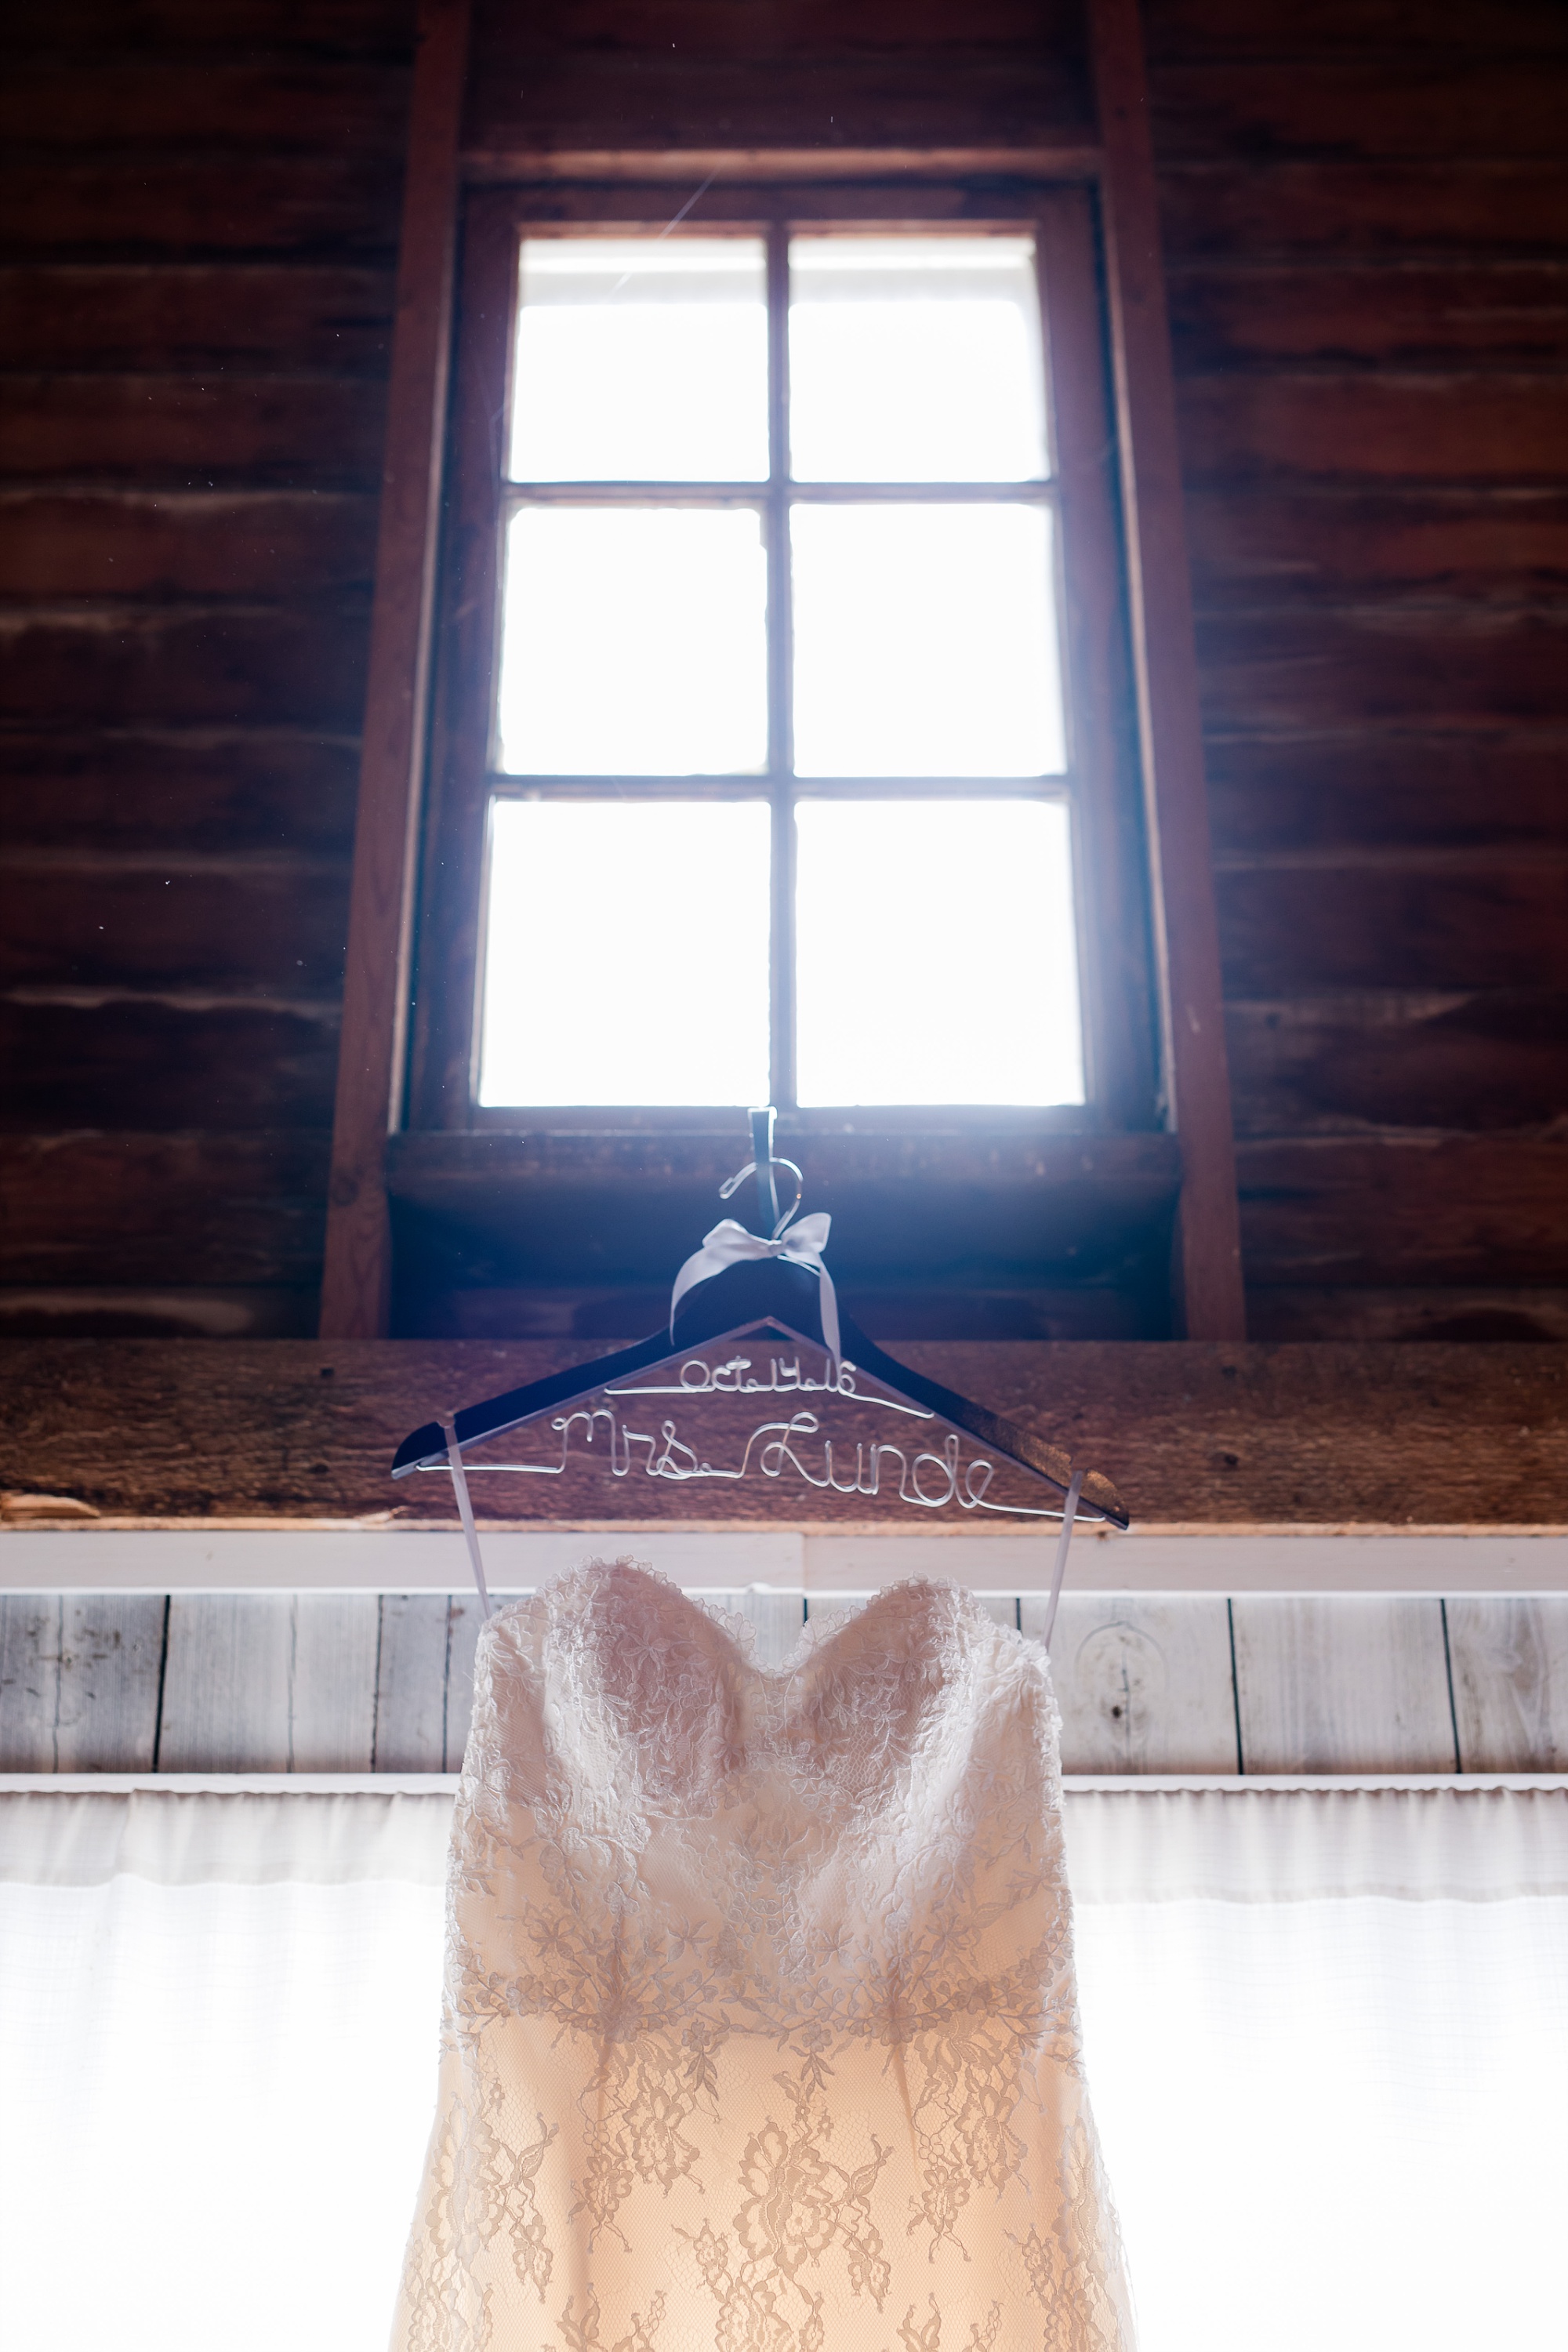 Fall, Country Styled Barn Wedding at the Barn at Dunvilla | Danielle &amp; Jake | Photography by Amber Langerud Photography